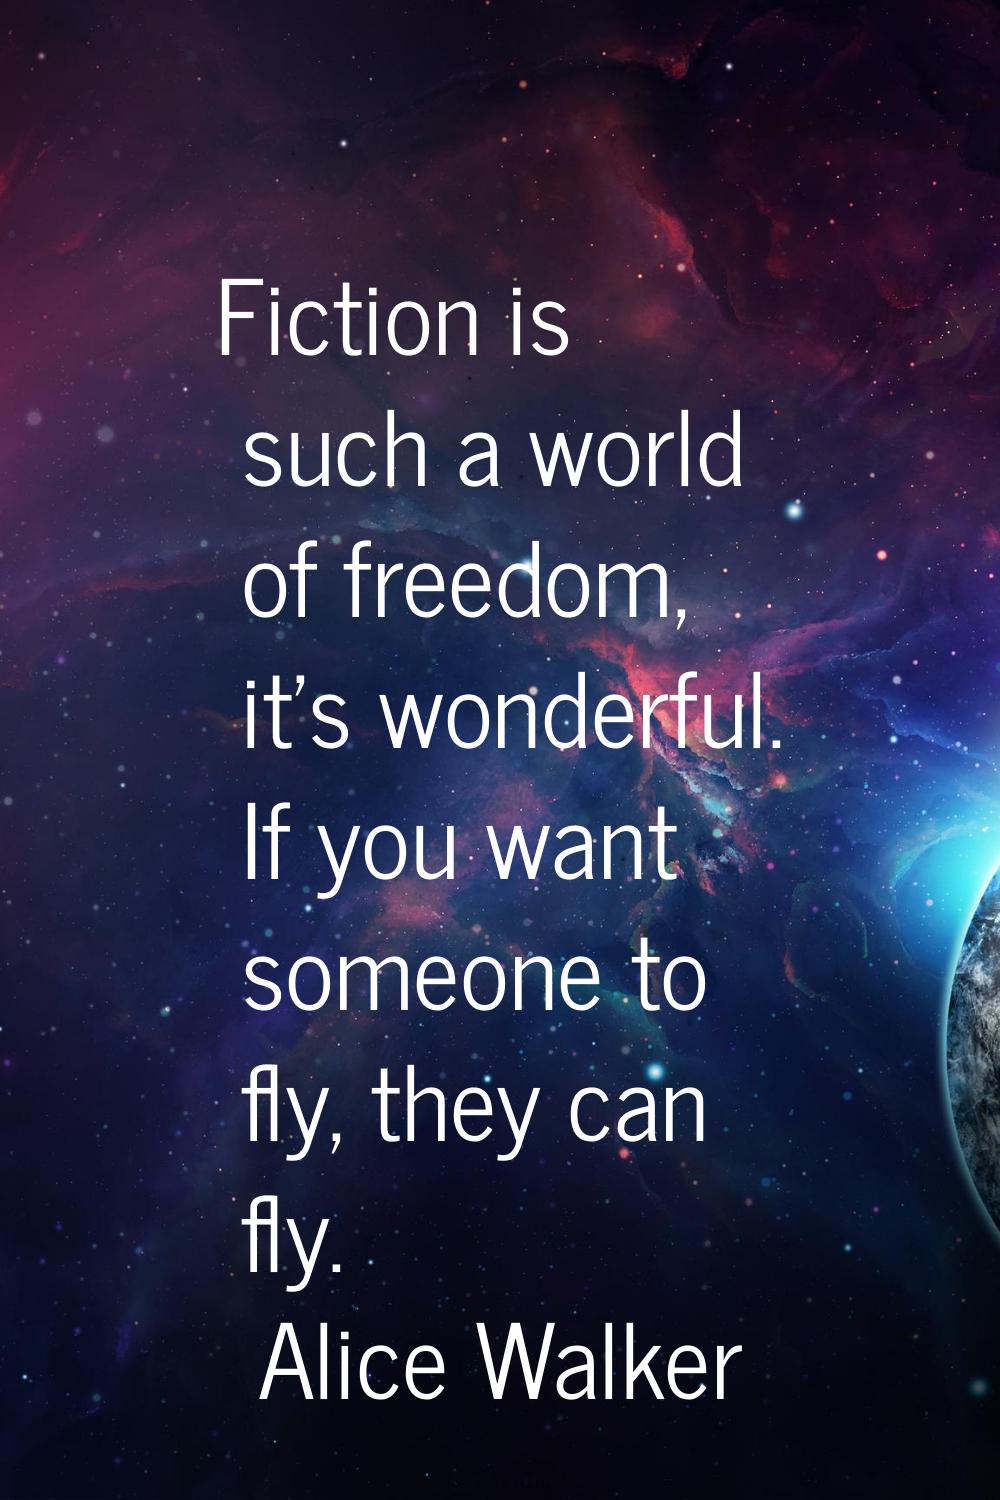 Fiction is such a world of freedom, it's wonderful. If you want someone to fly, they can fly.